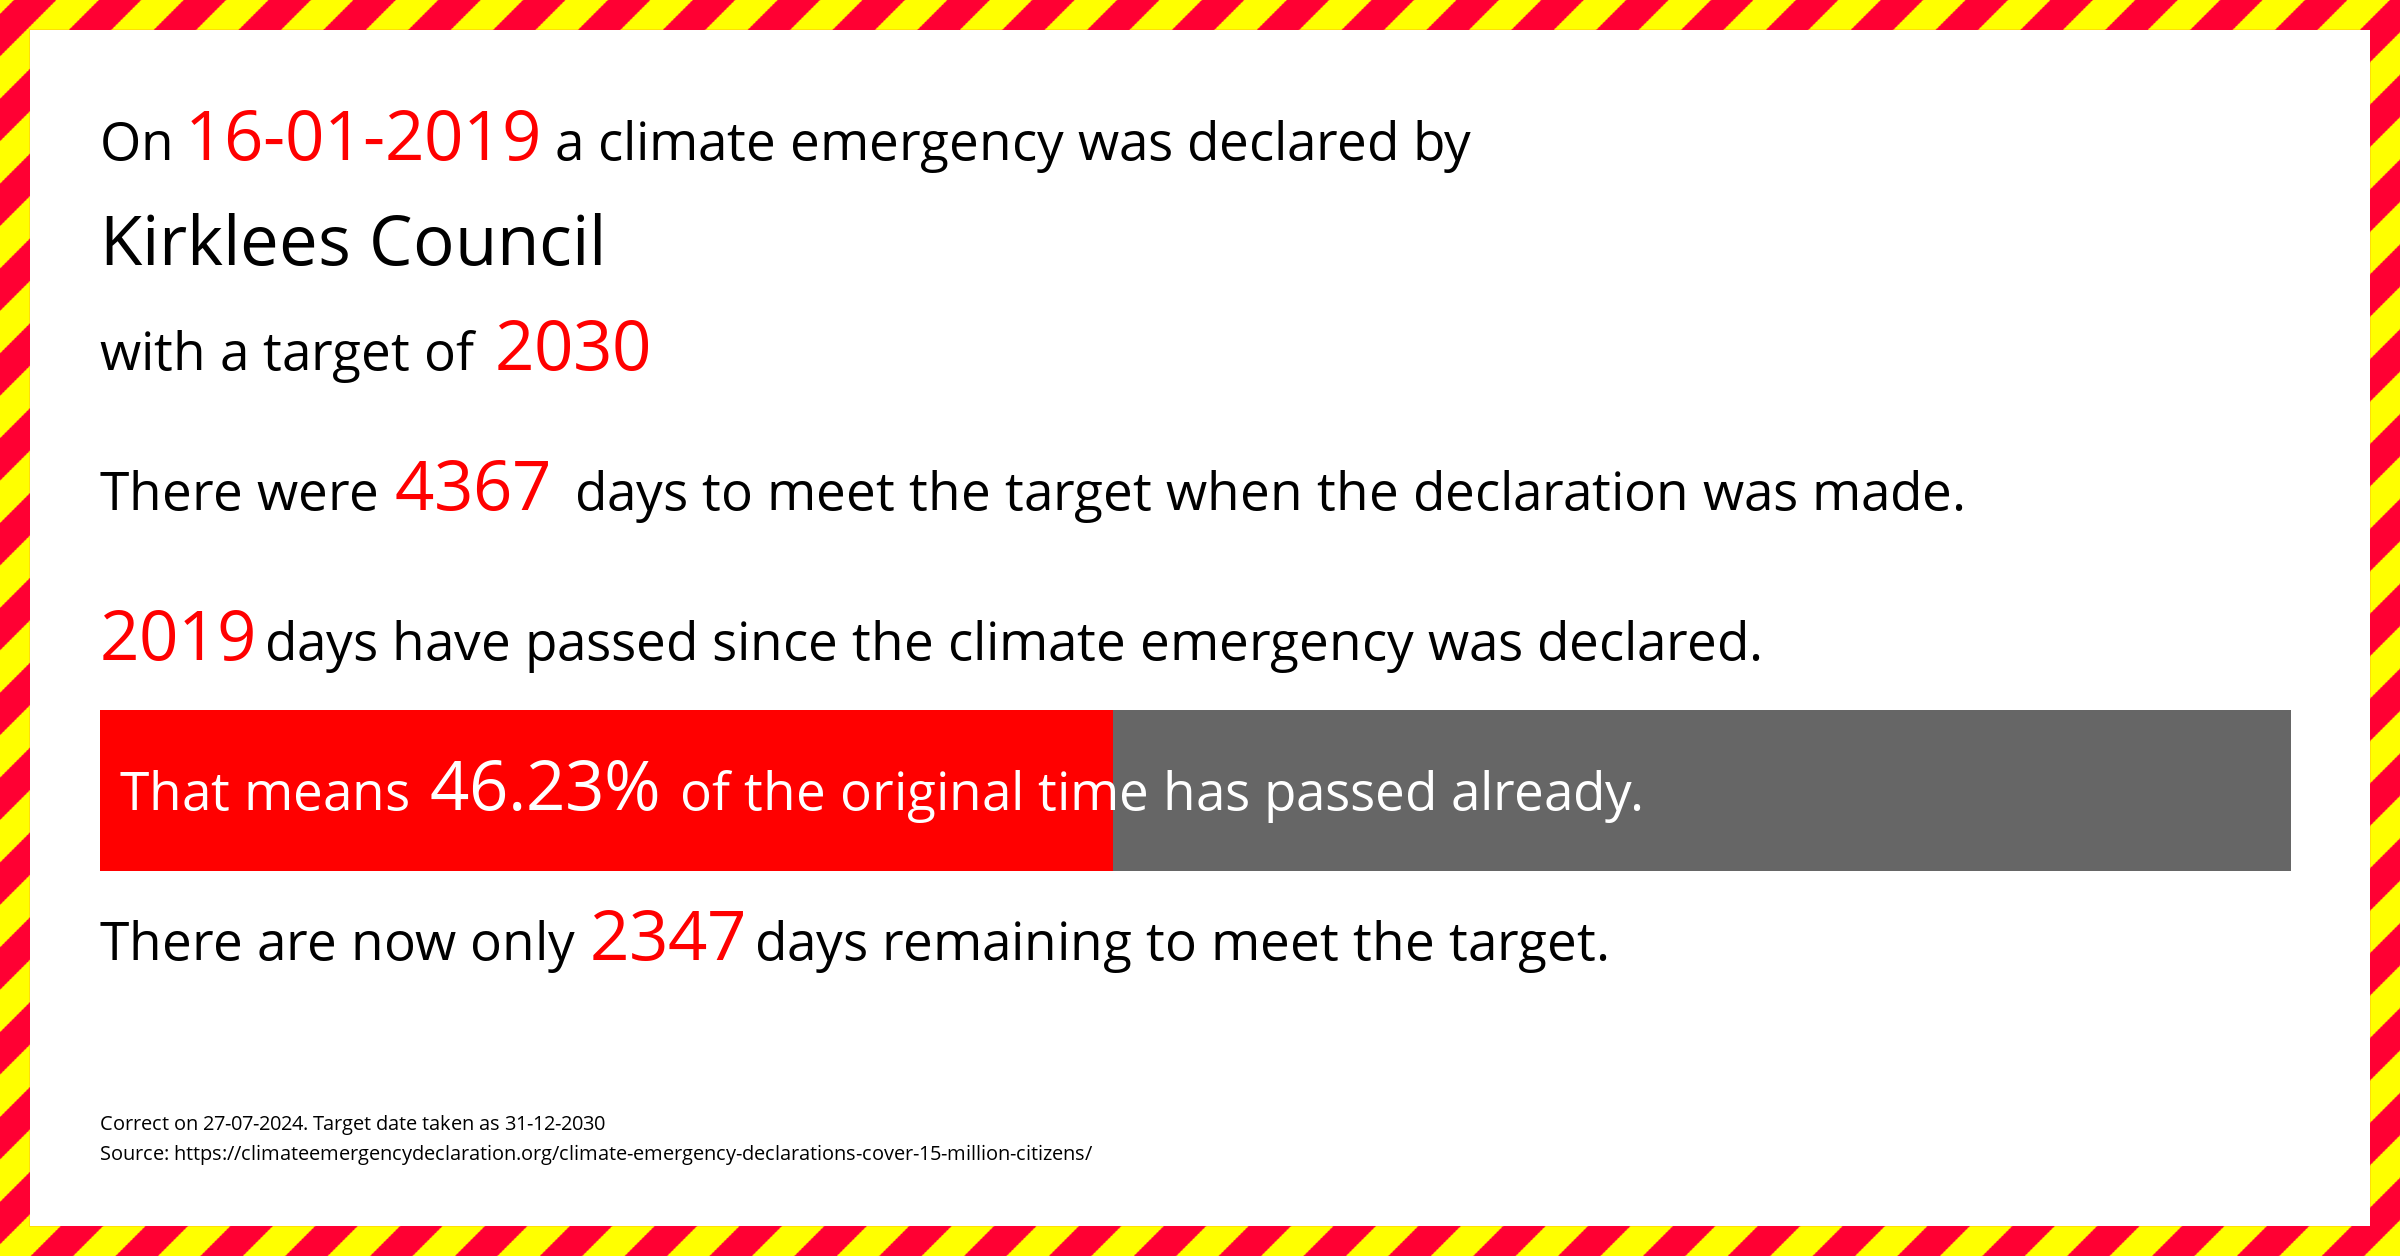 Kirklees Council declared a Climate emergency on Wednesday 16th January 2019, with a target of 2030.